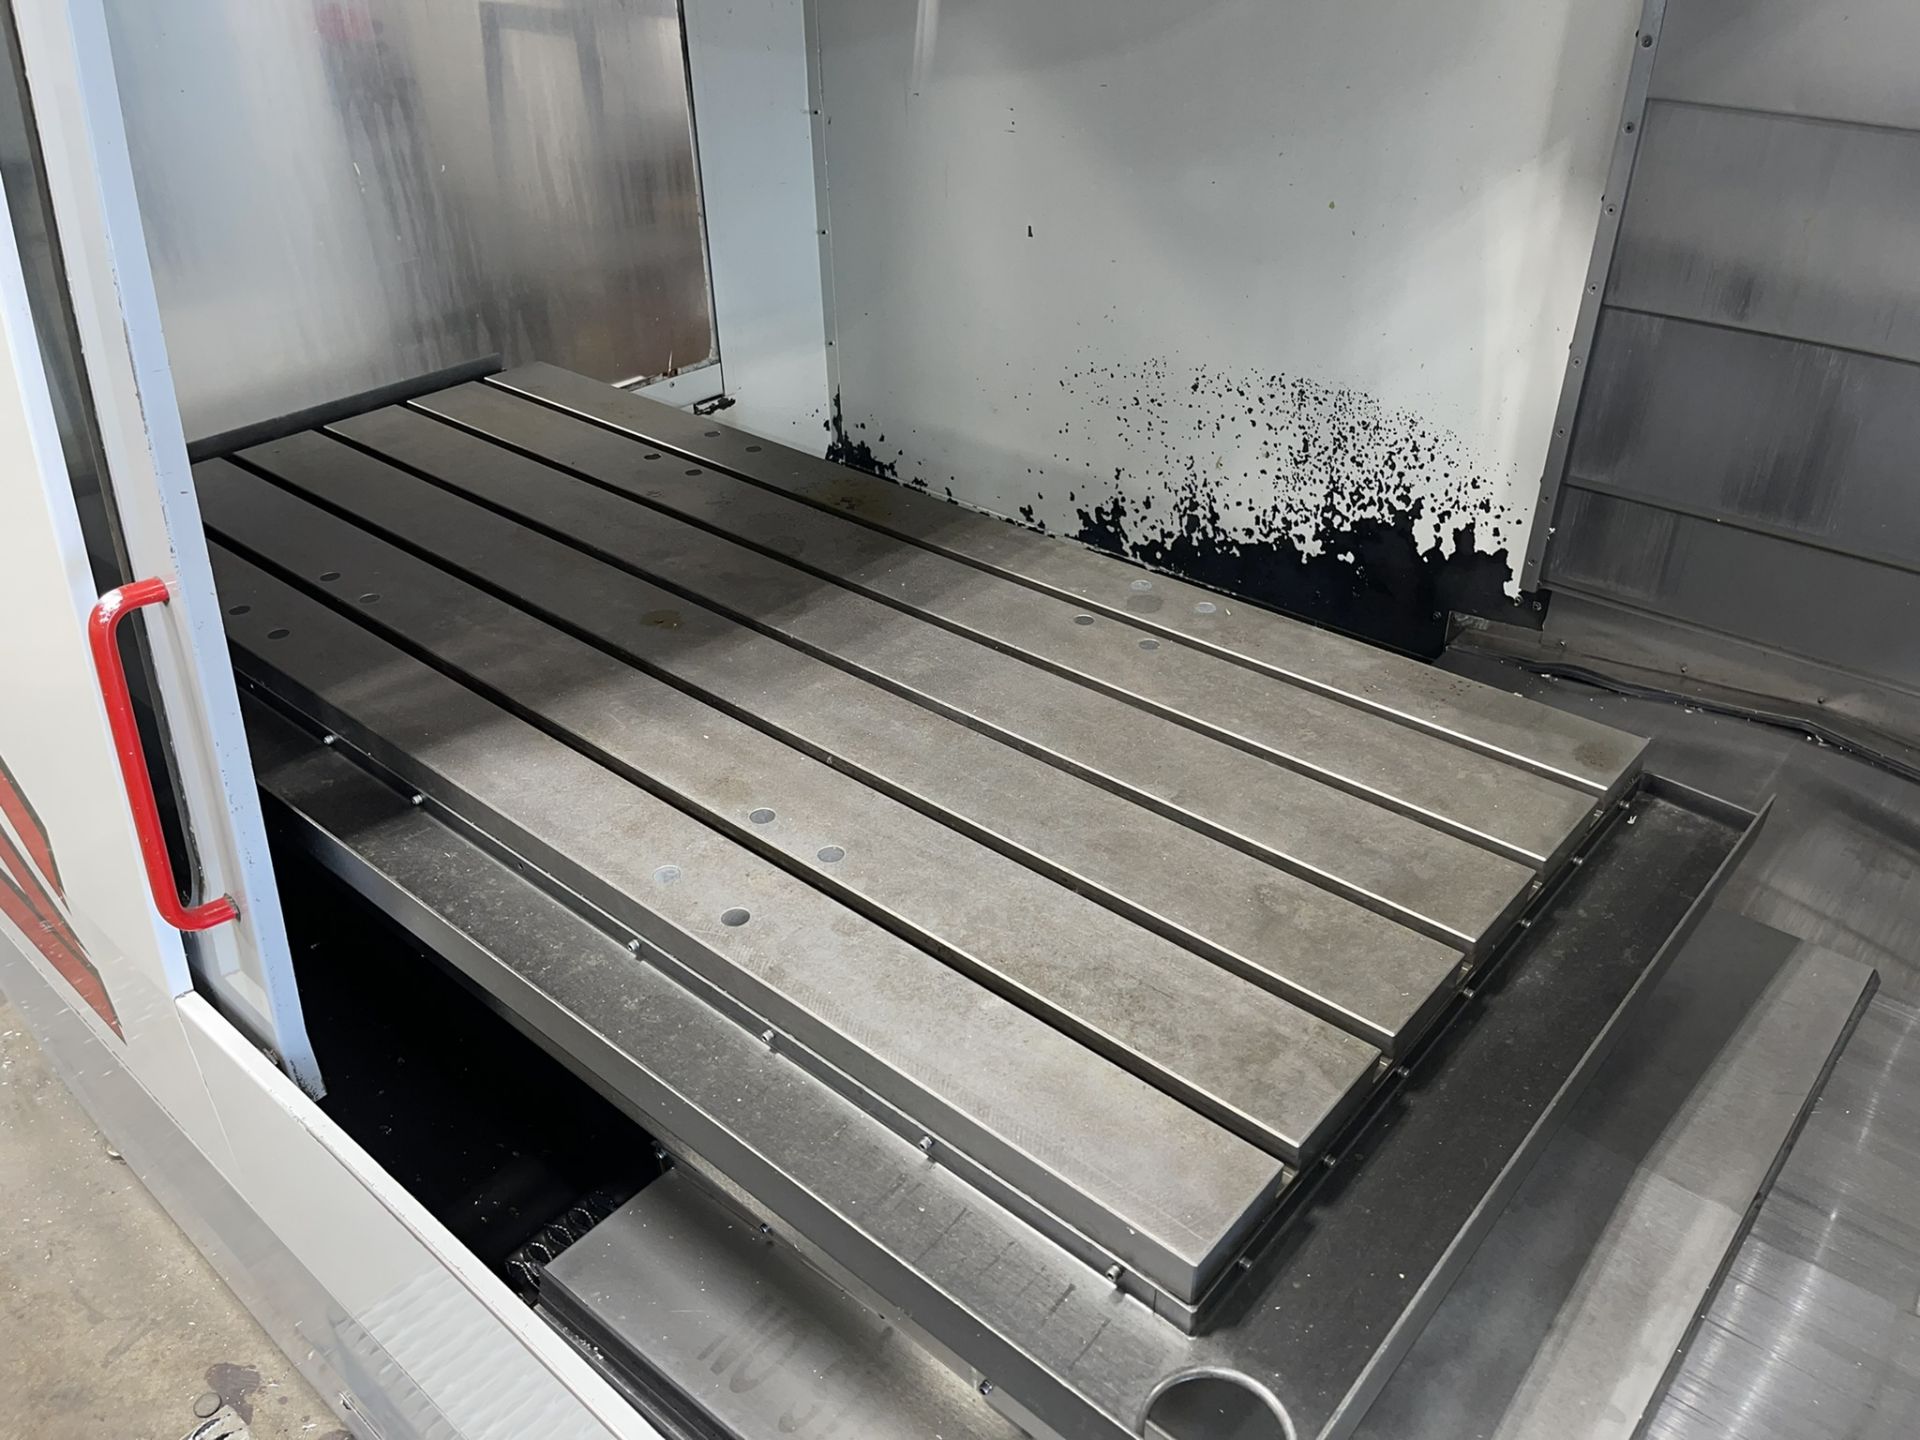 Haas VF-6 CNC Vertical Machining Center, S/N 13781 - Image 4 of 13